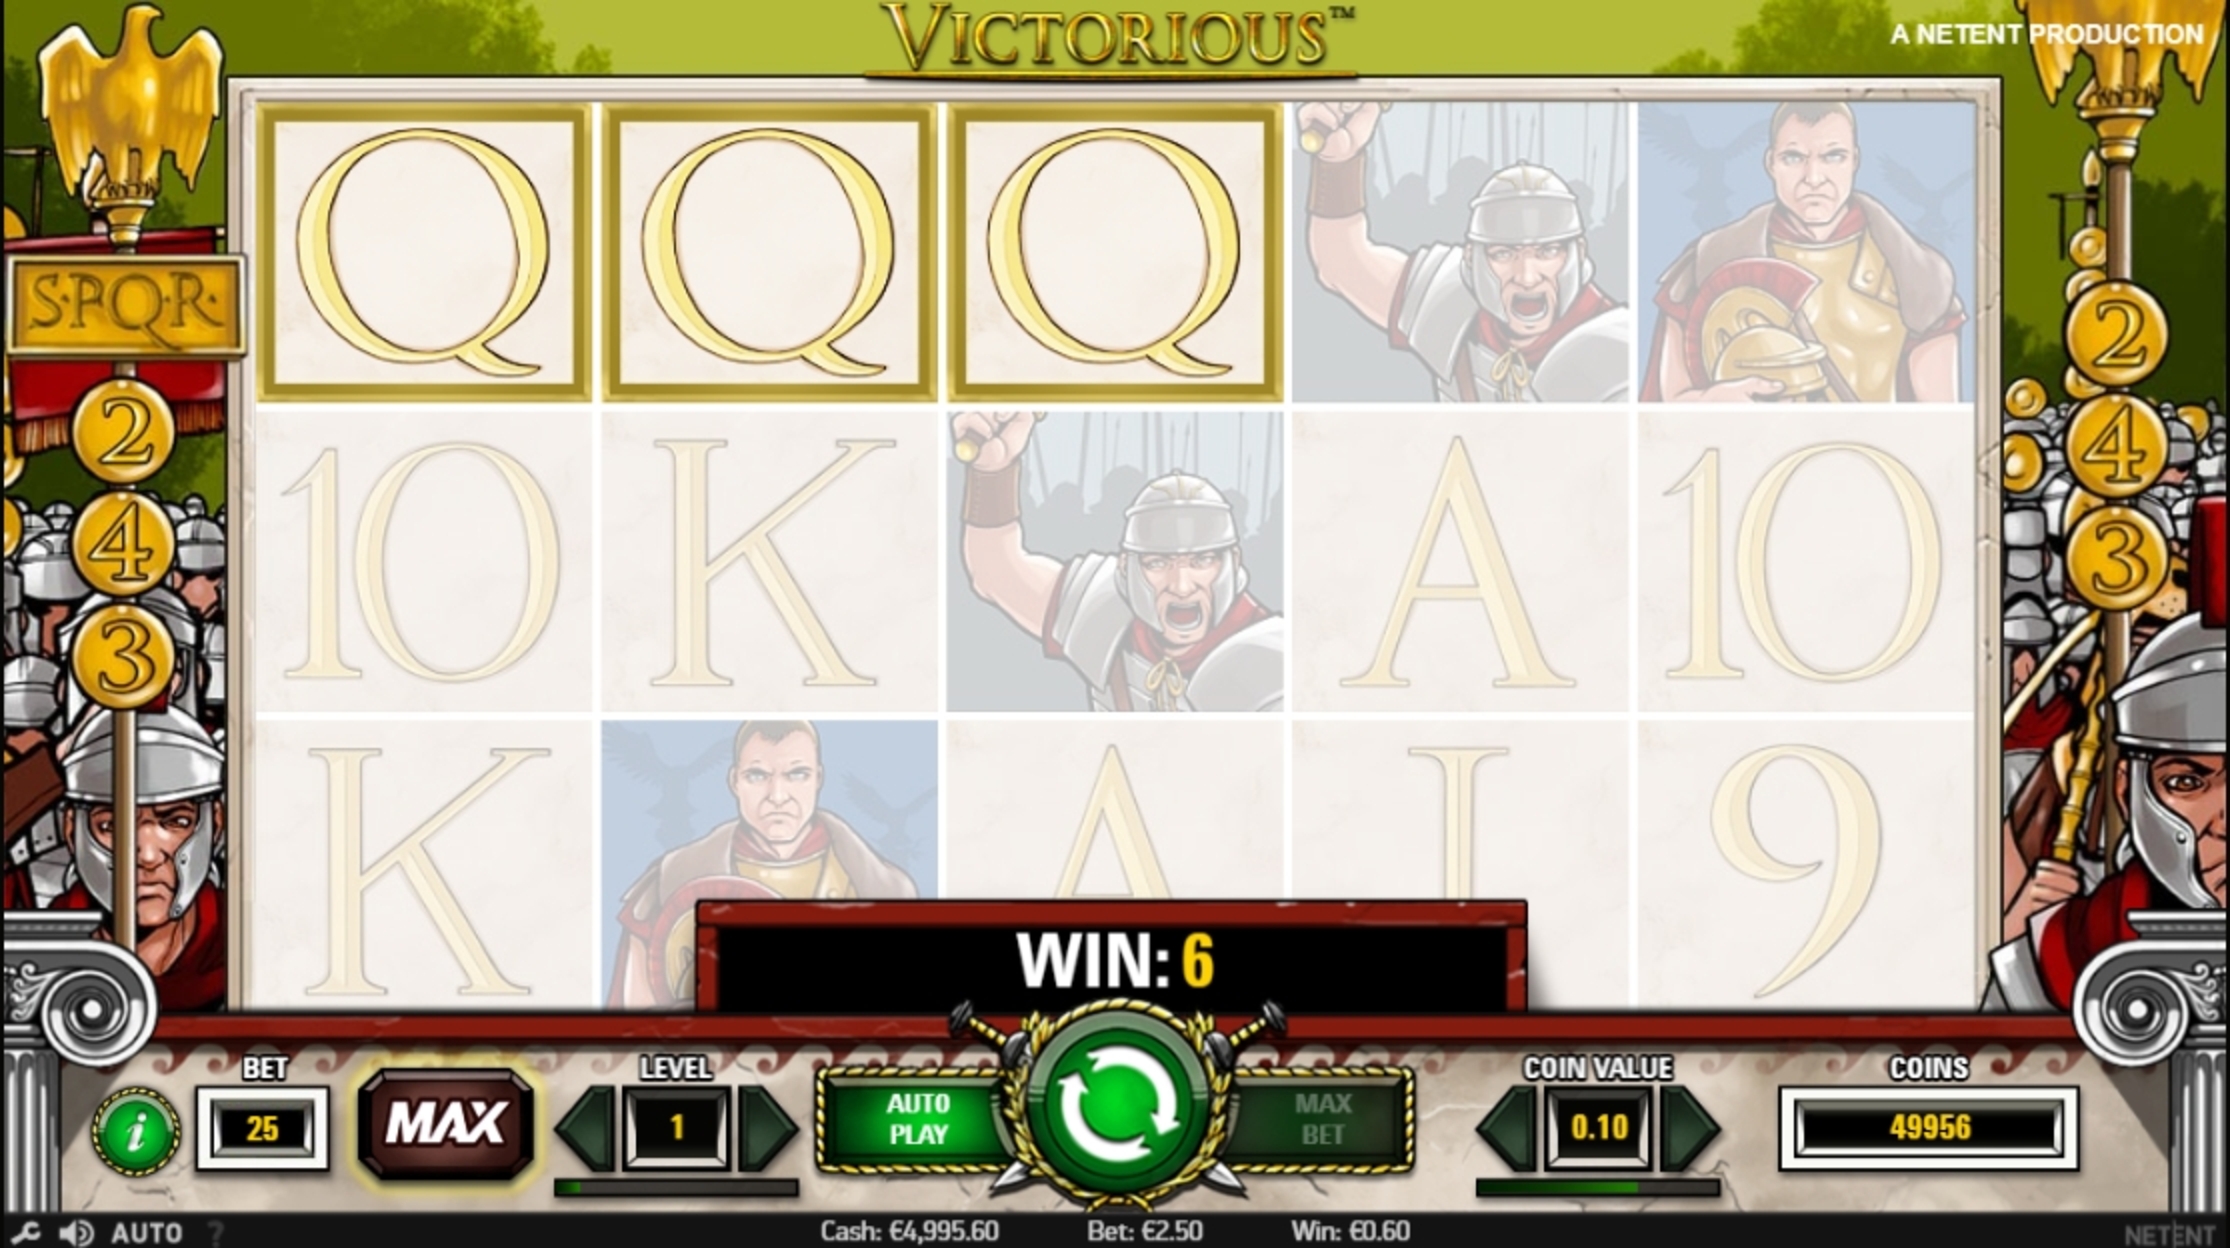 Win Money in Victorious Free Slot Game by NetEnt